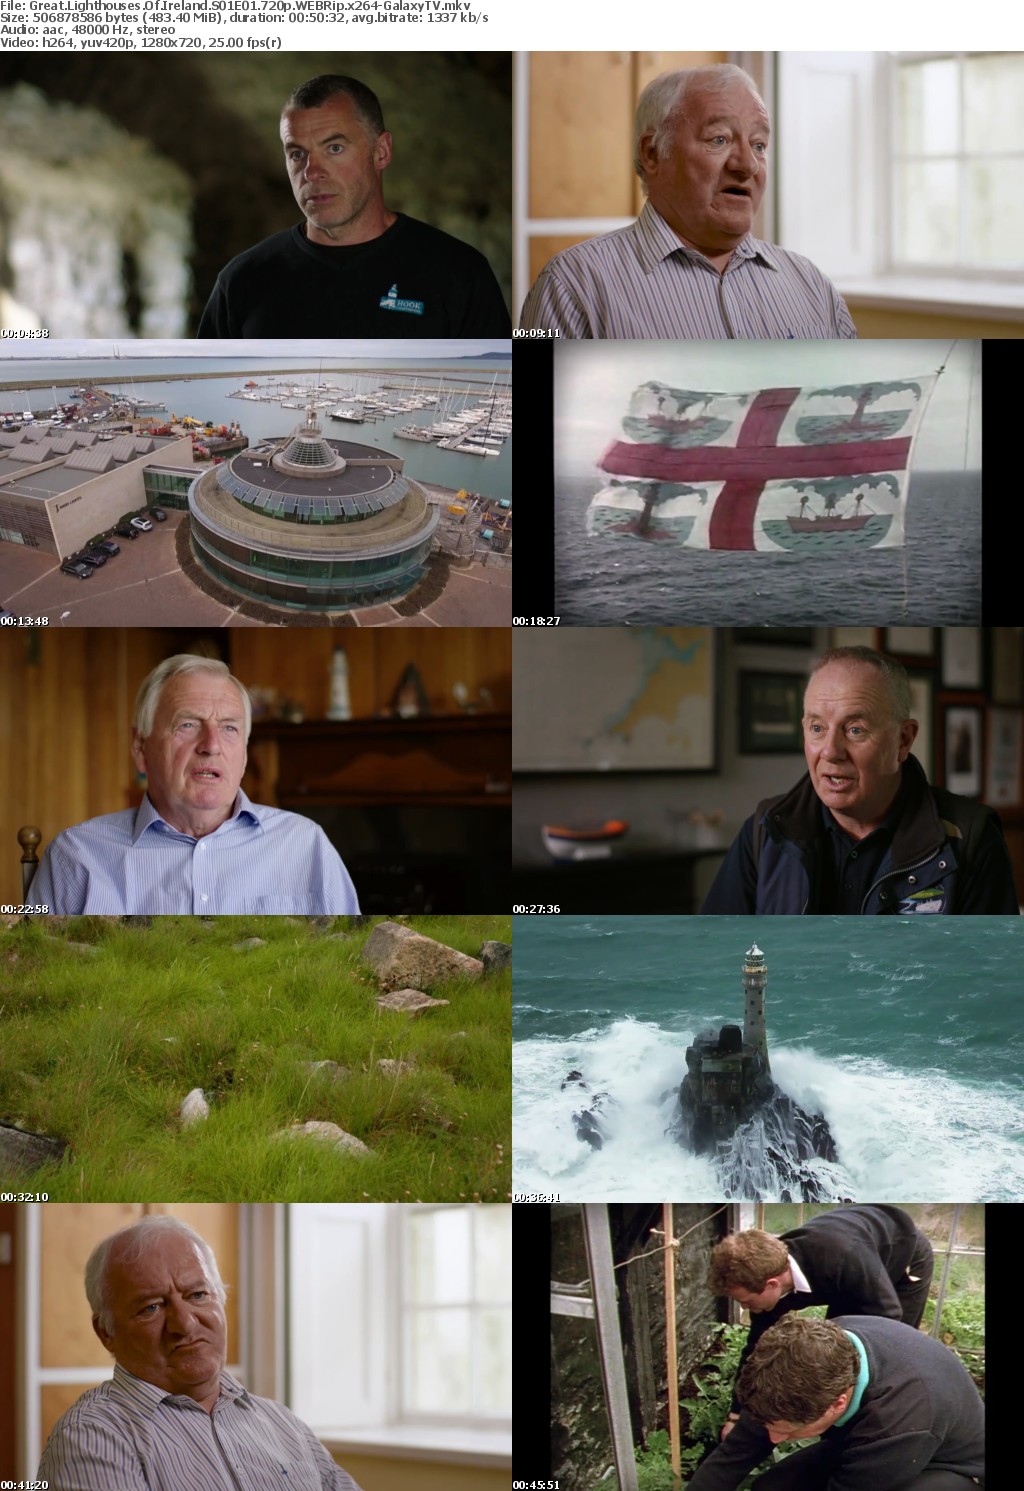 Great Lighthouses Of Ireland S01 COMPLETE 720p WEBRip x264-GalaxyTV